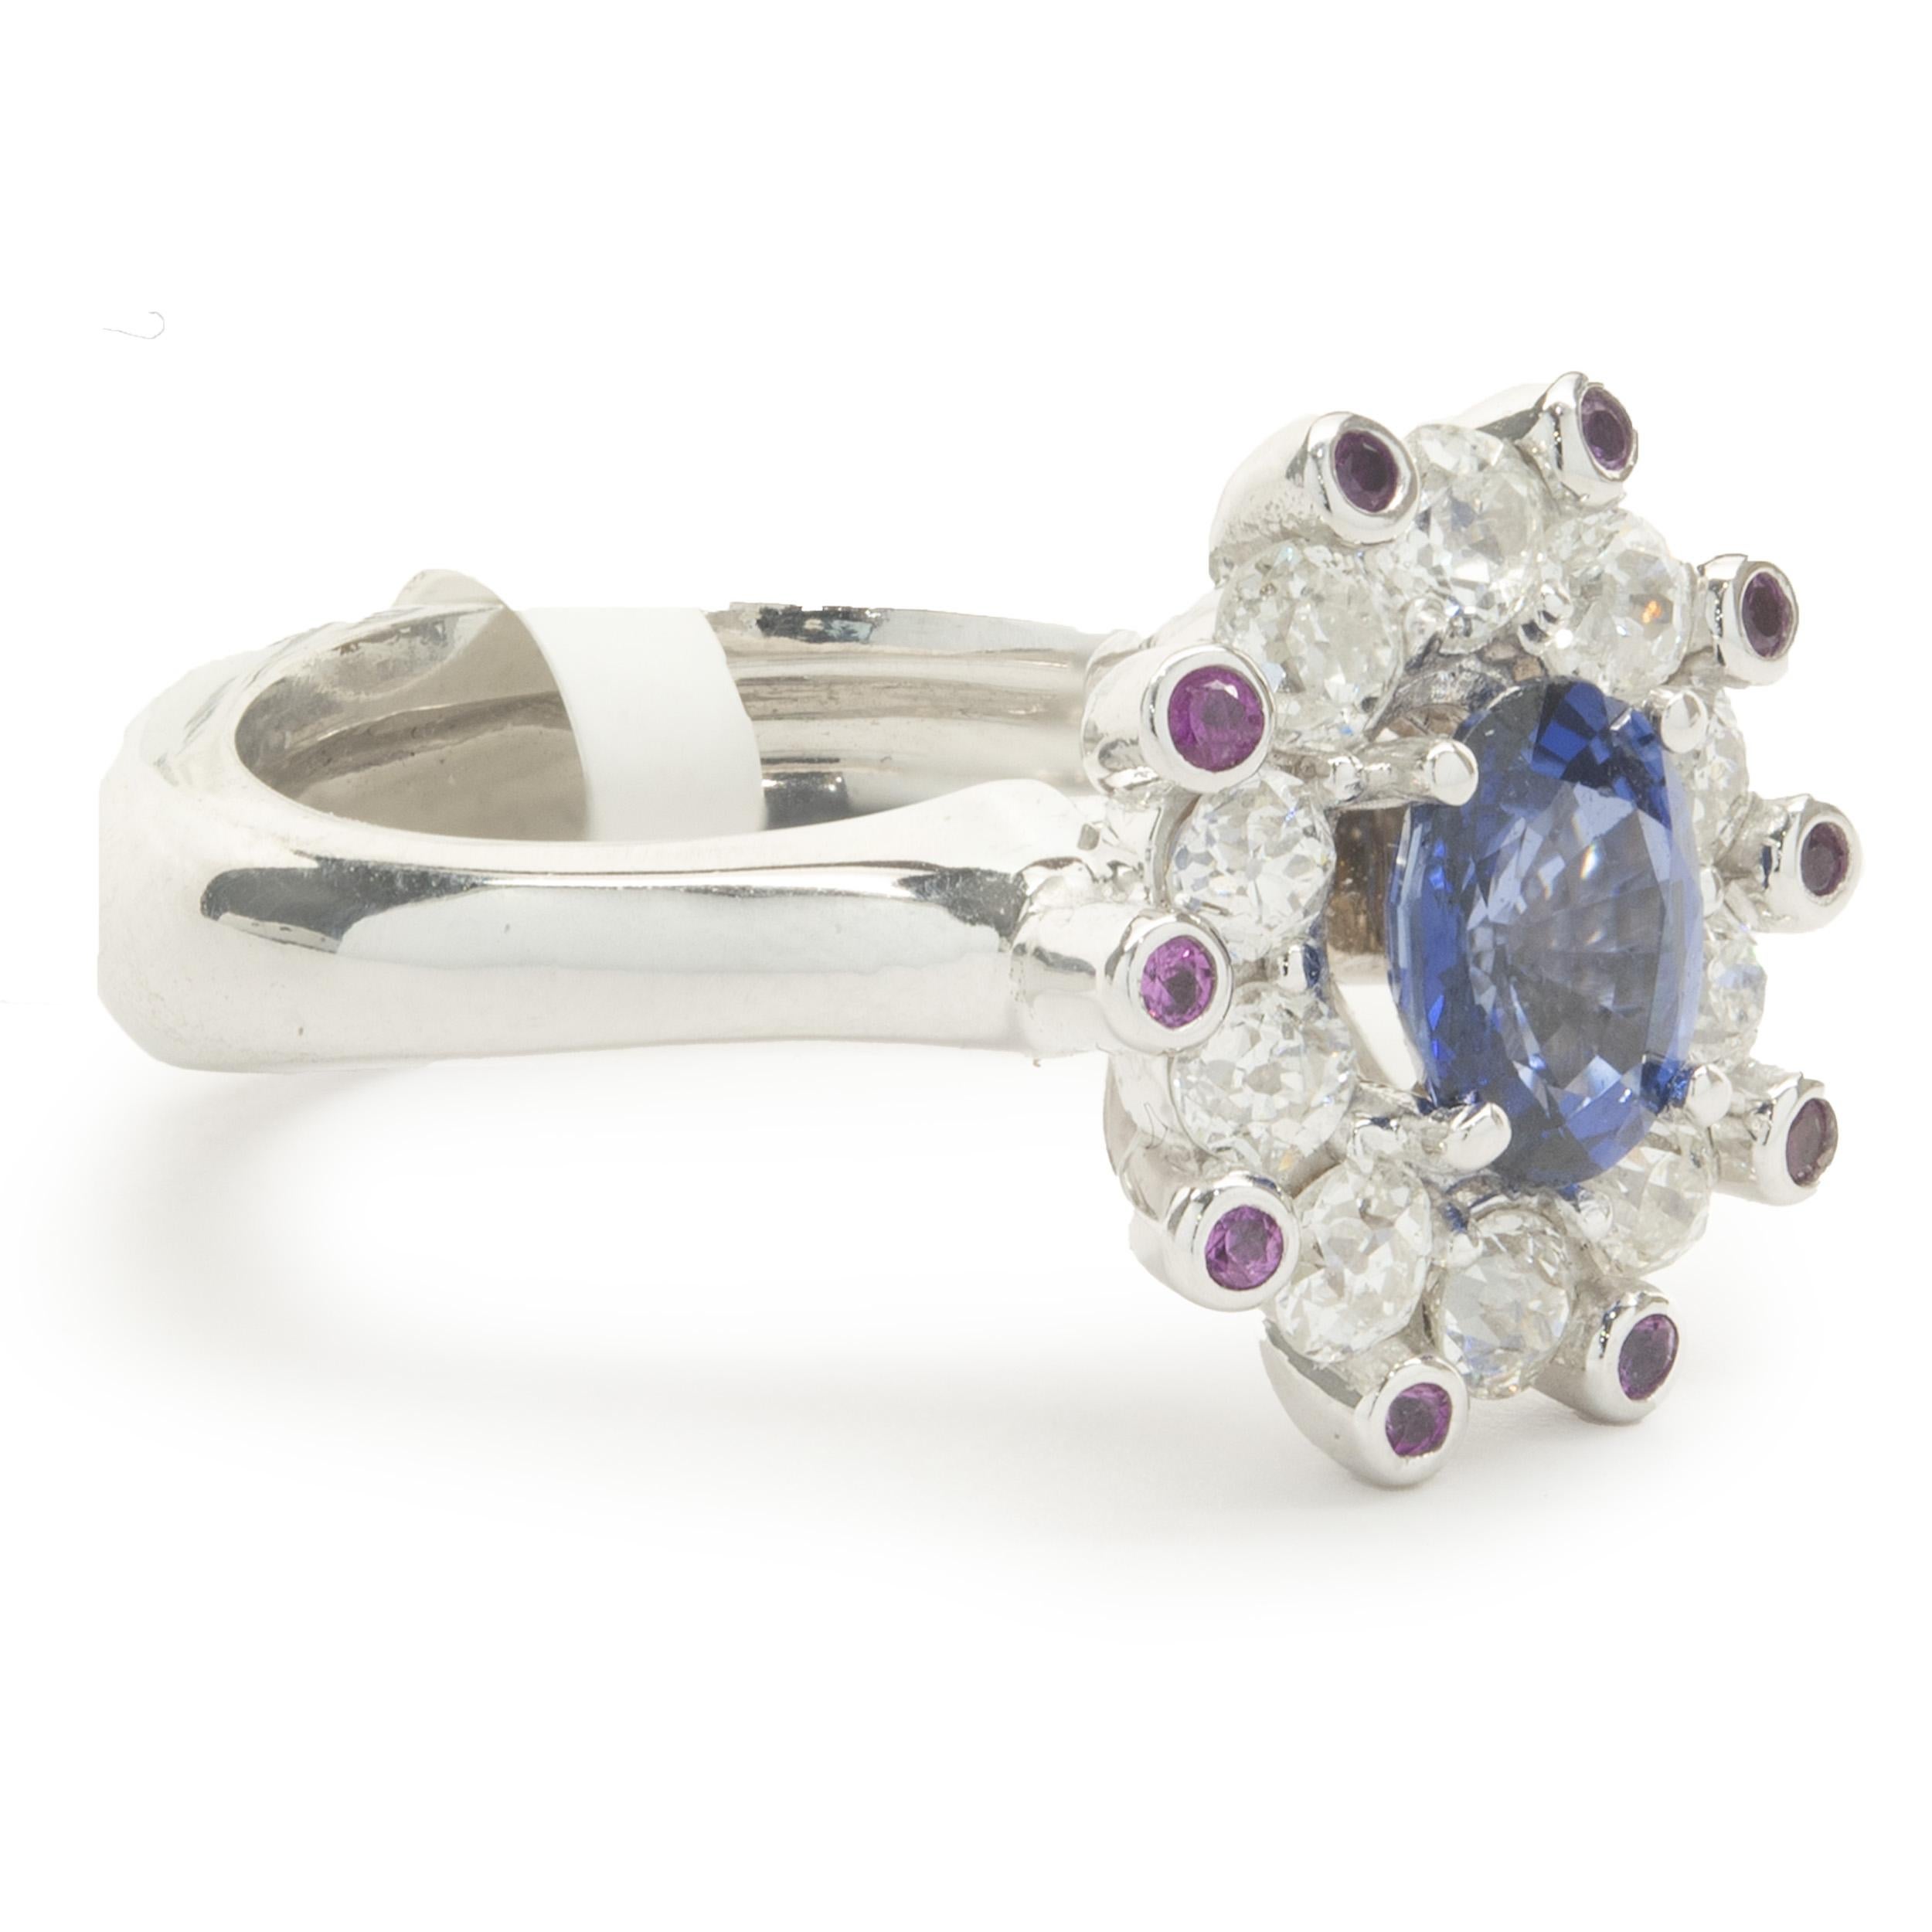 Designer: custom
Material: 14K white gold
Diamond: 12 round rose cut = 1.65cttw
Color:  I
Clarity: SI1
Sapphire: 1 oval cut = 1.70ct
Color: Royal Blue
Clarity: AA fine gem quality
Dimensions: ring top measures 16.60mm wide
Ring Size: 7.5